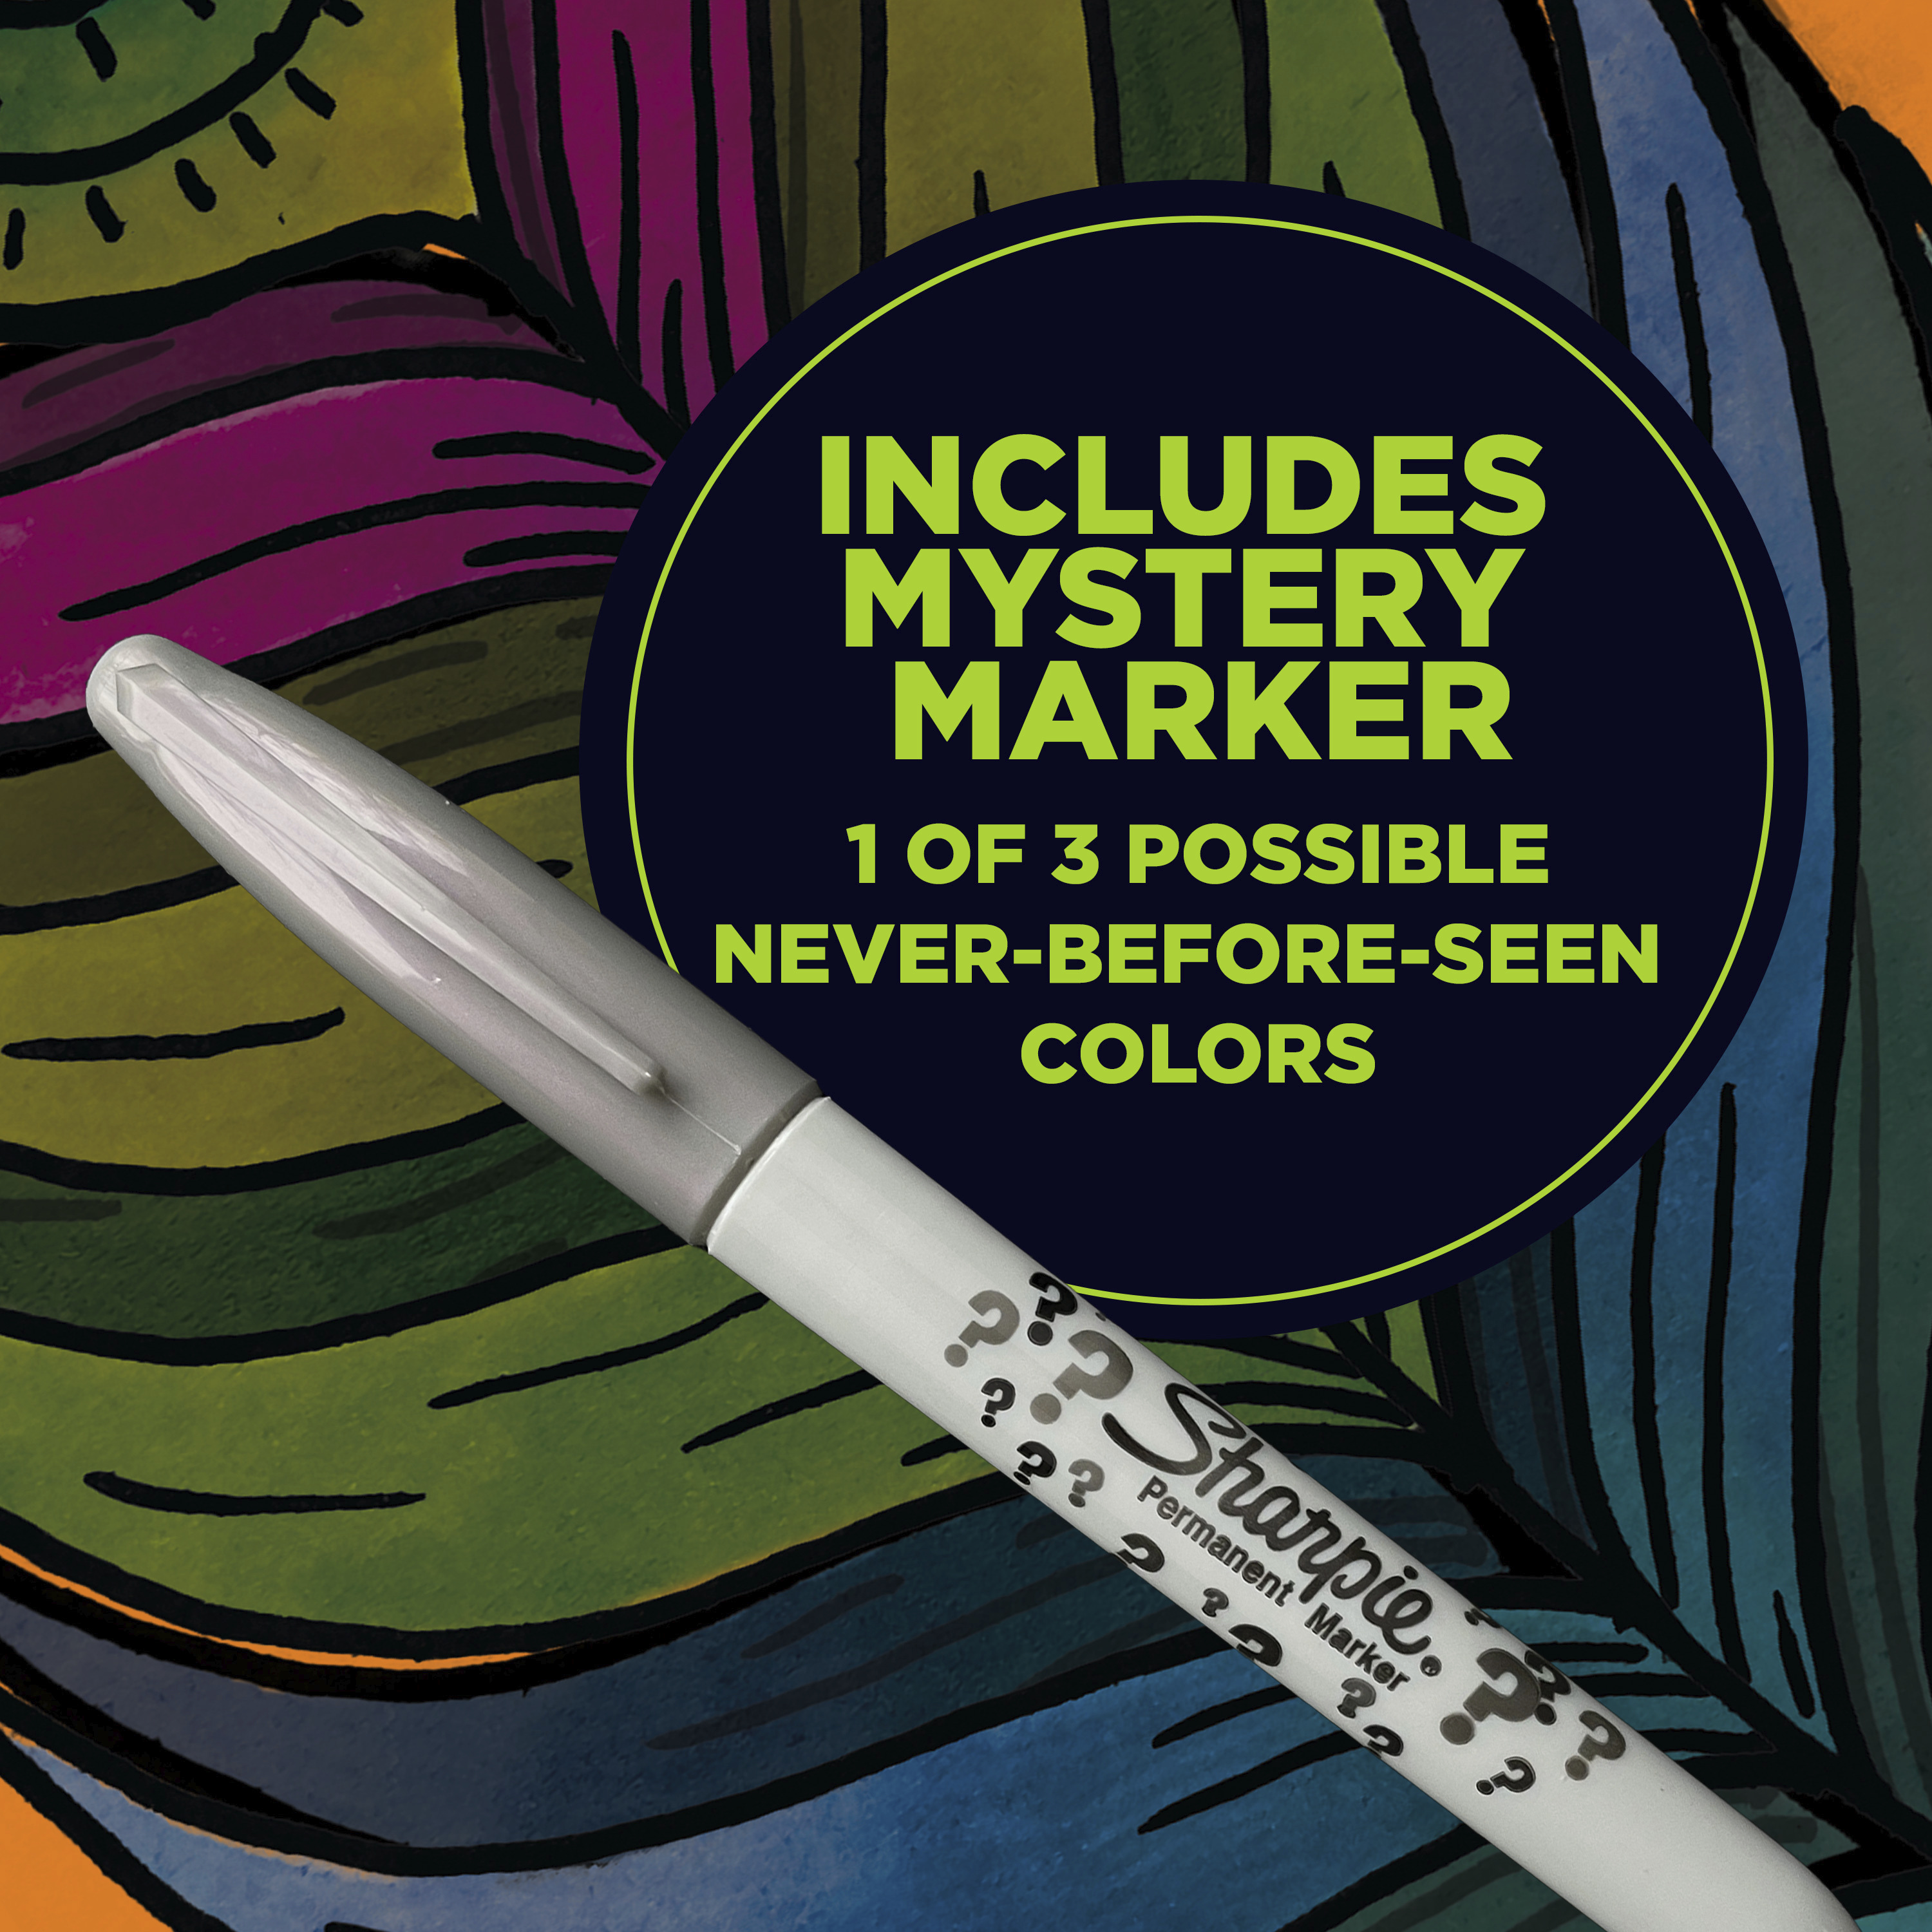 Sharpie Permanent Markers, Limited Edition, Assorted Colors Plus 1 Mystery Marker, 60 Count - image 3 of 9